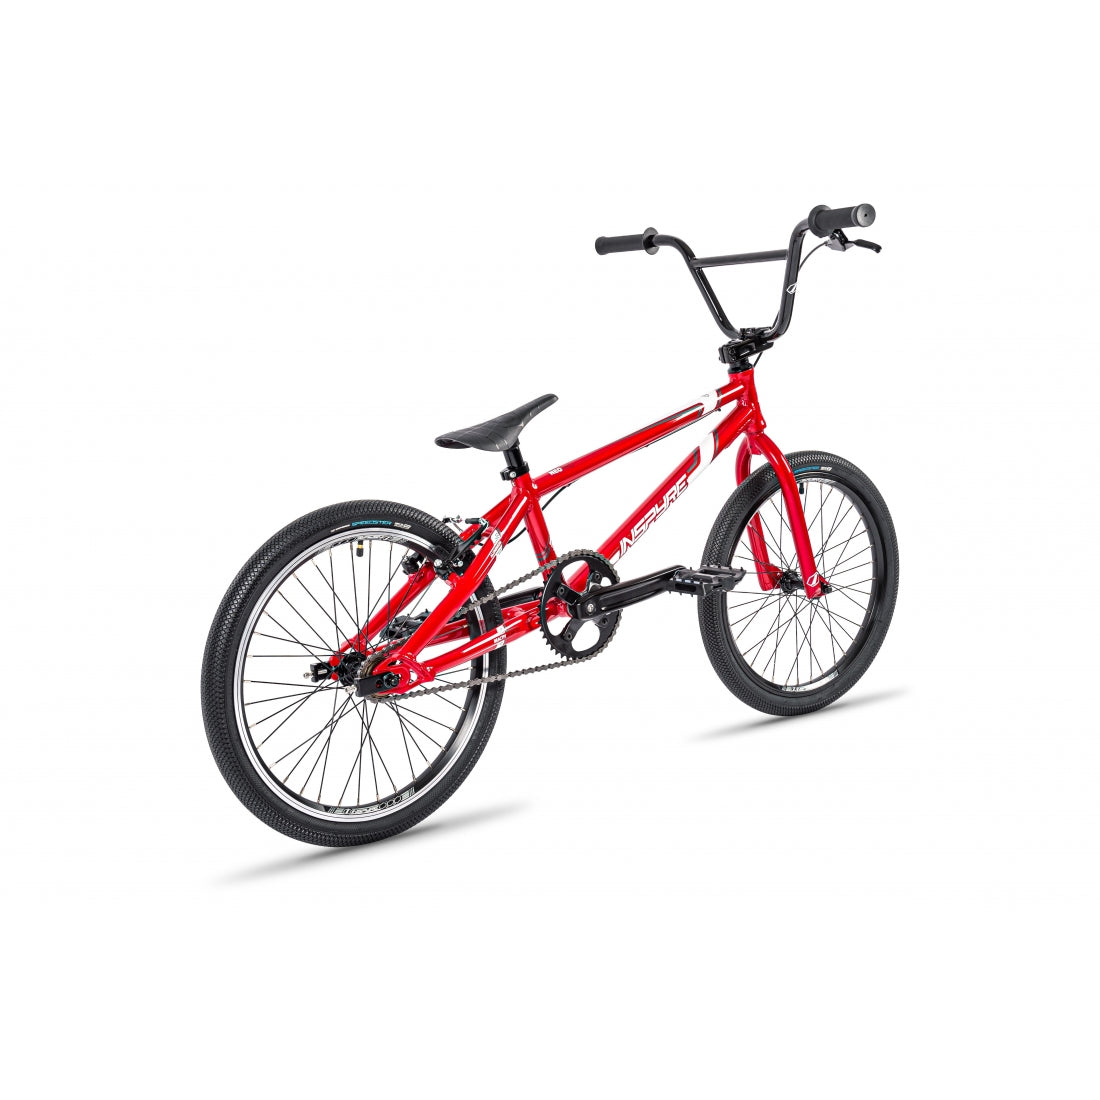 Red Inspyre Neo Pro BMX race bike isolated on a white background.